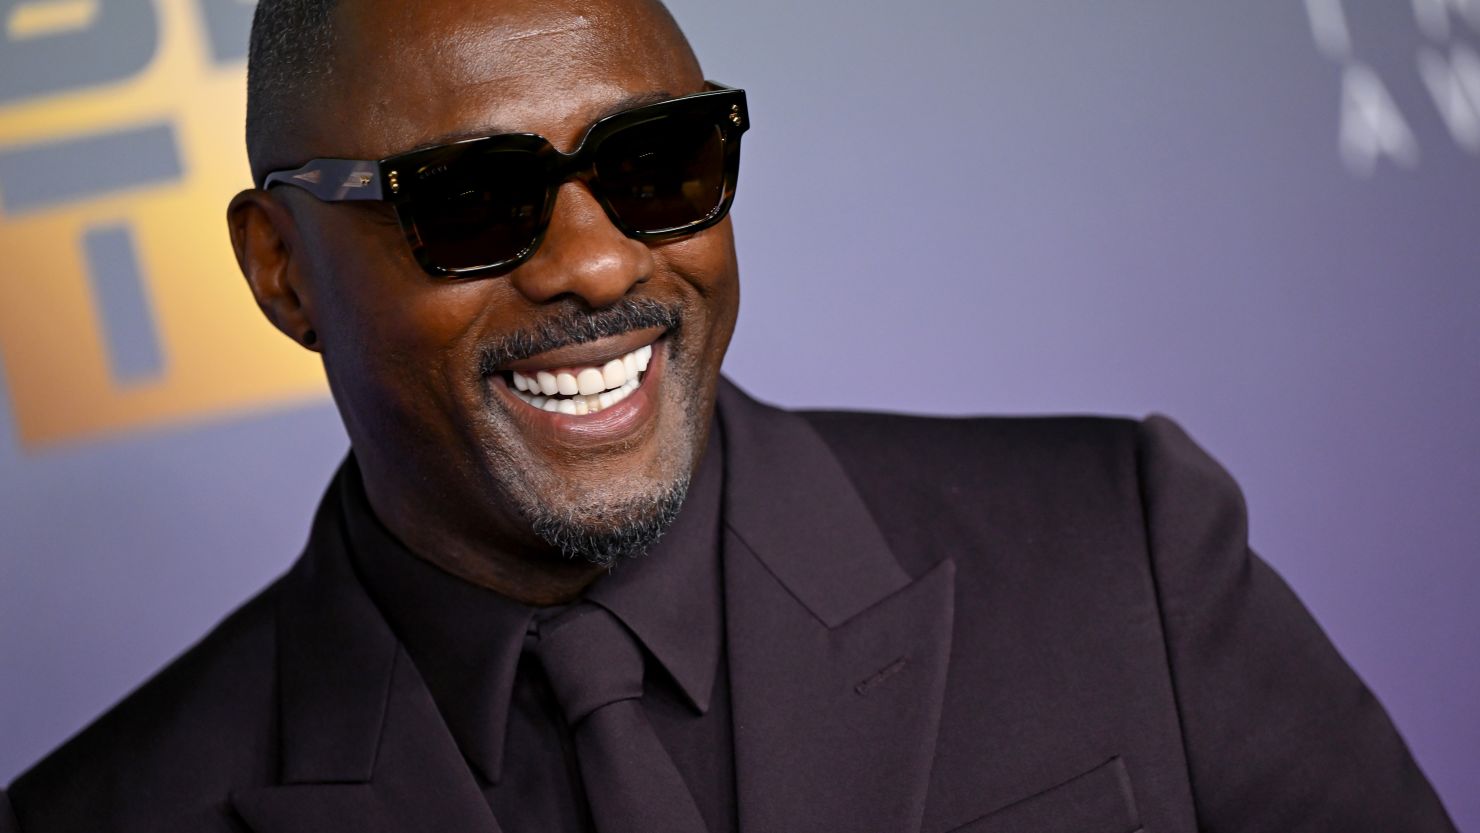 Idris Elba, pictured here at the NAACP Image Awards on March 16 in Los Angeles, is writing and directing a new film set in Nigeria.